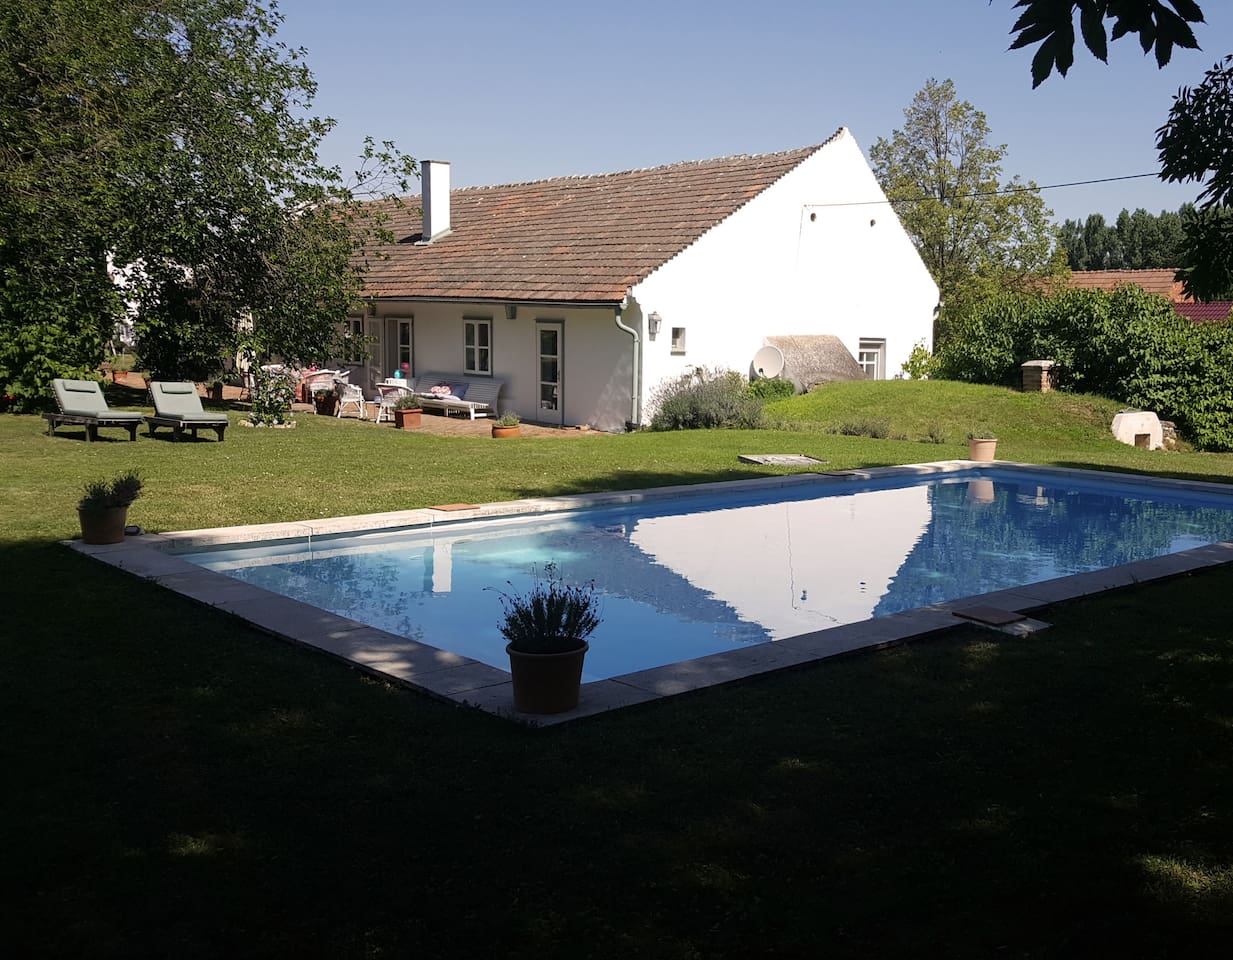 Country House With Pool Houses For Rent In Potzneusiedl